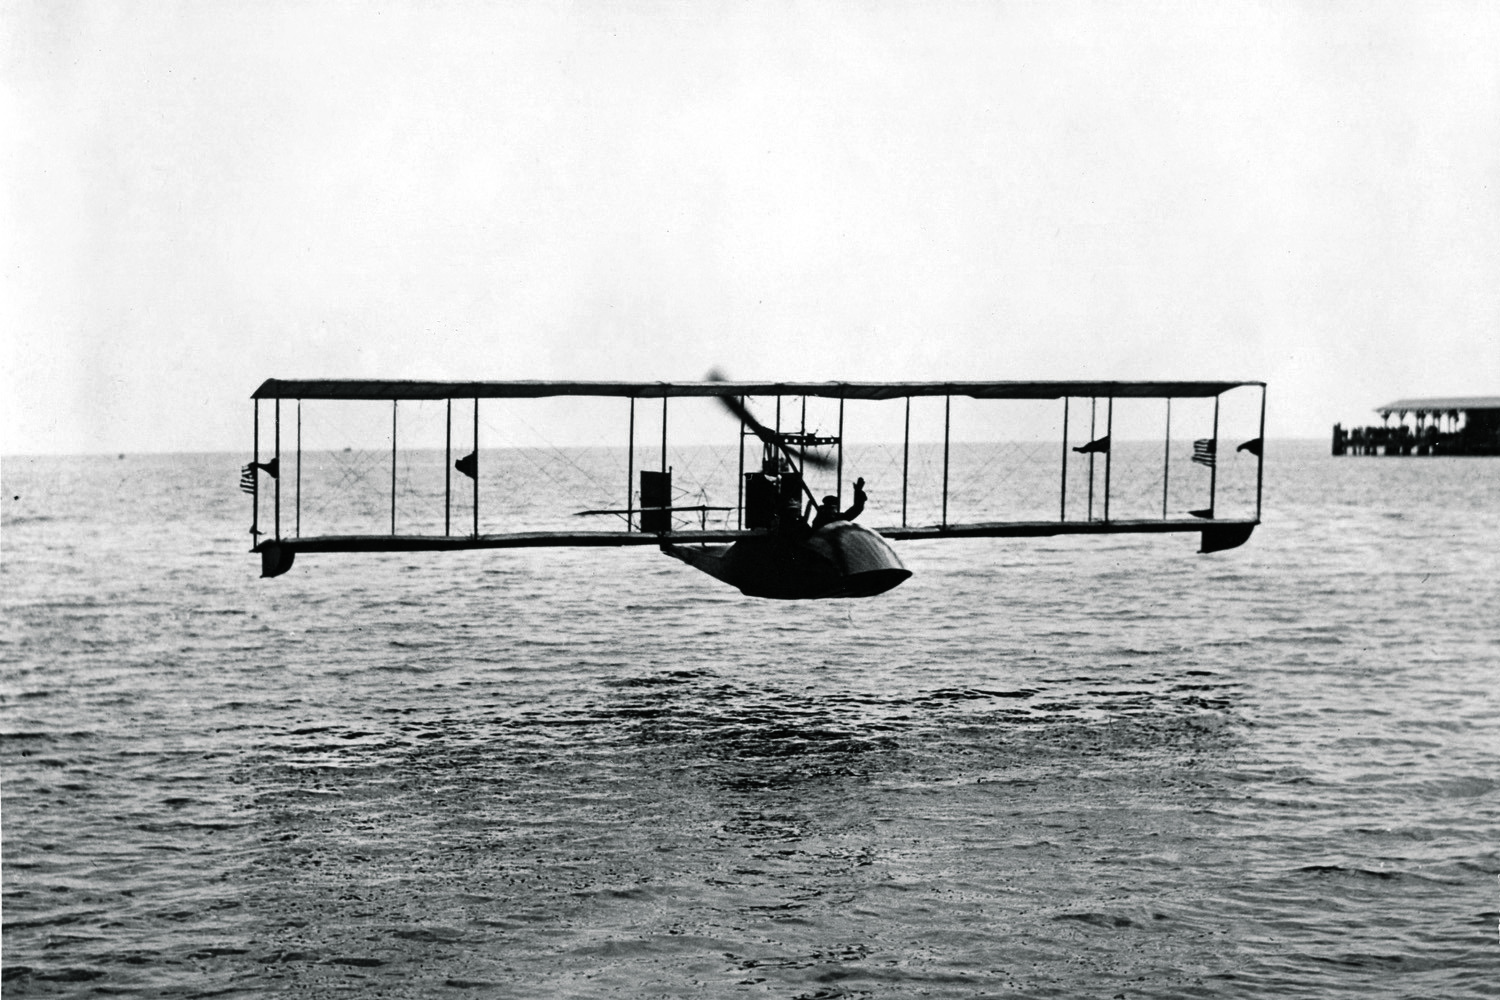 The first commercial flight in history took place across Florida’s Tampa Bay on Jan. 1, 1914—and the ticket cost $400 (Courtesy St. Petersburg Museum of History Archives)